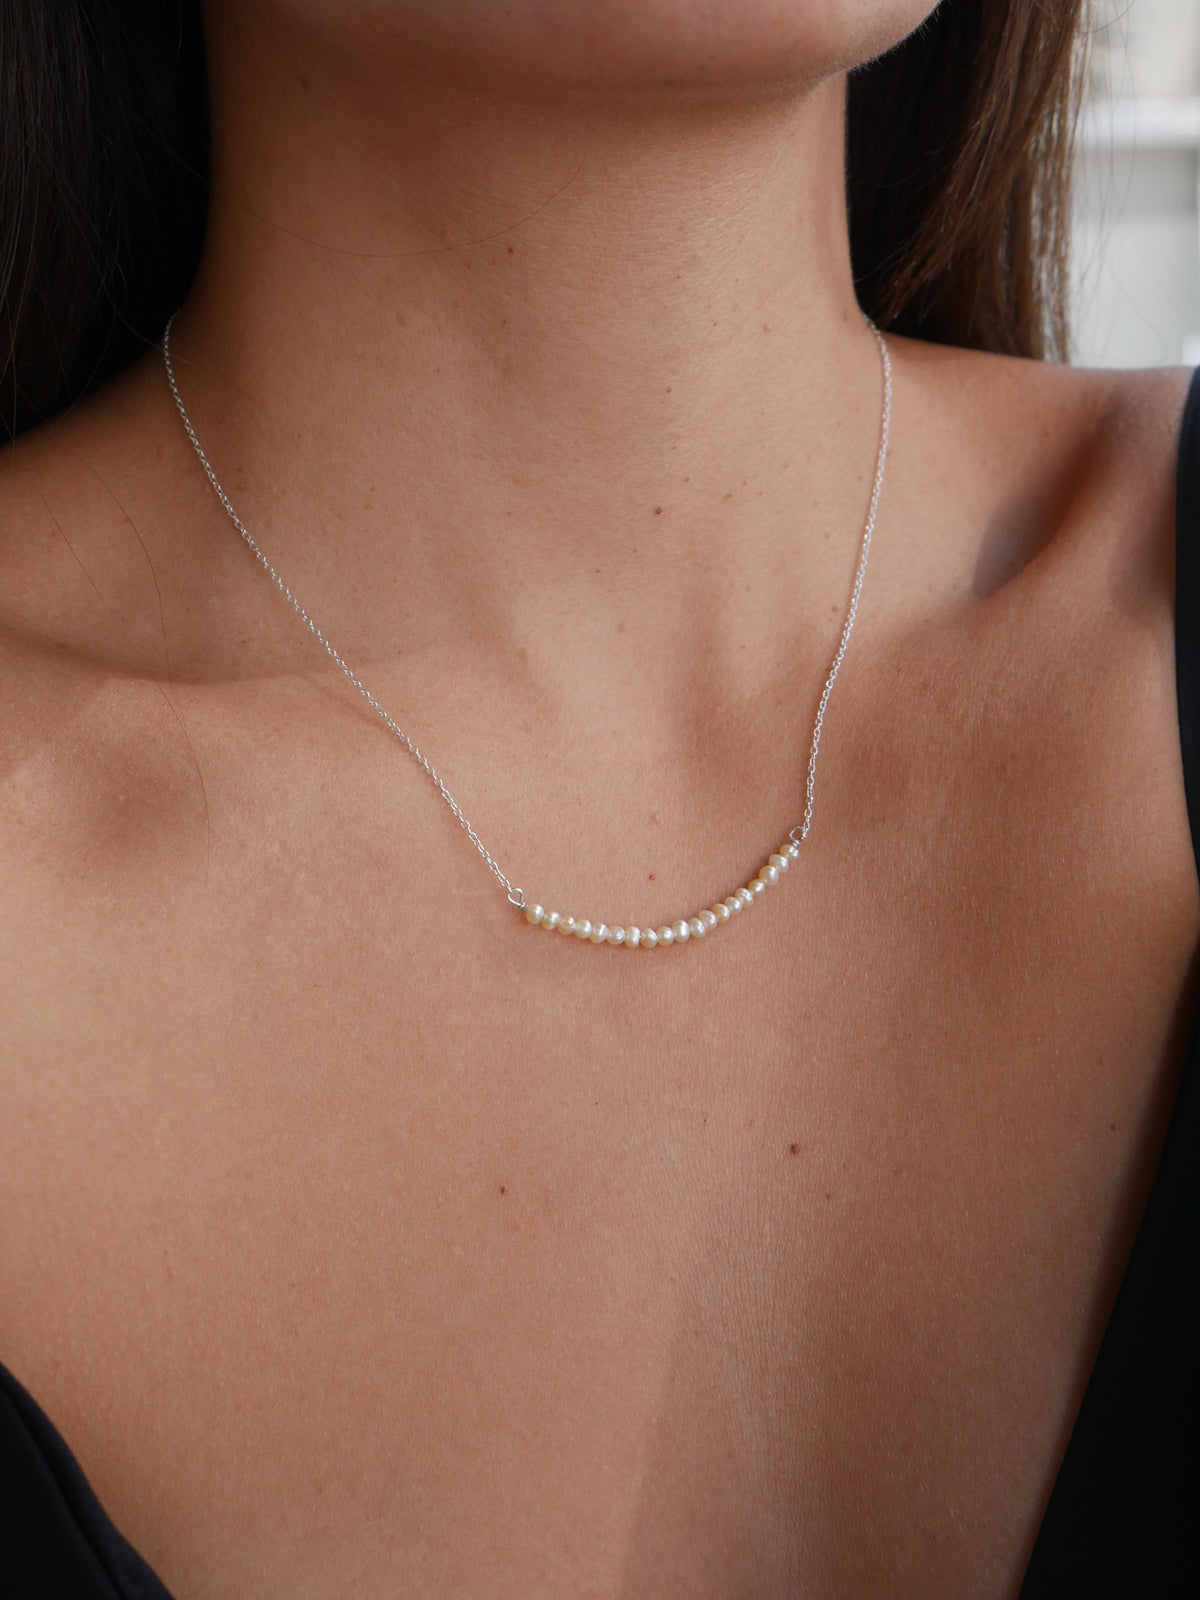 Dainty Pearl Necklace white gold .925 sterling silver. Pearl u necklace with small pearls in the front. Waterproof. Real pear necklace for cheap good quality. unique pearl necklaces. June Birthstone jewelry . Gift ideas. Wedding jewelry. Bridesmaids Necklaces. shopping in Miami Kesley Boutique